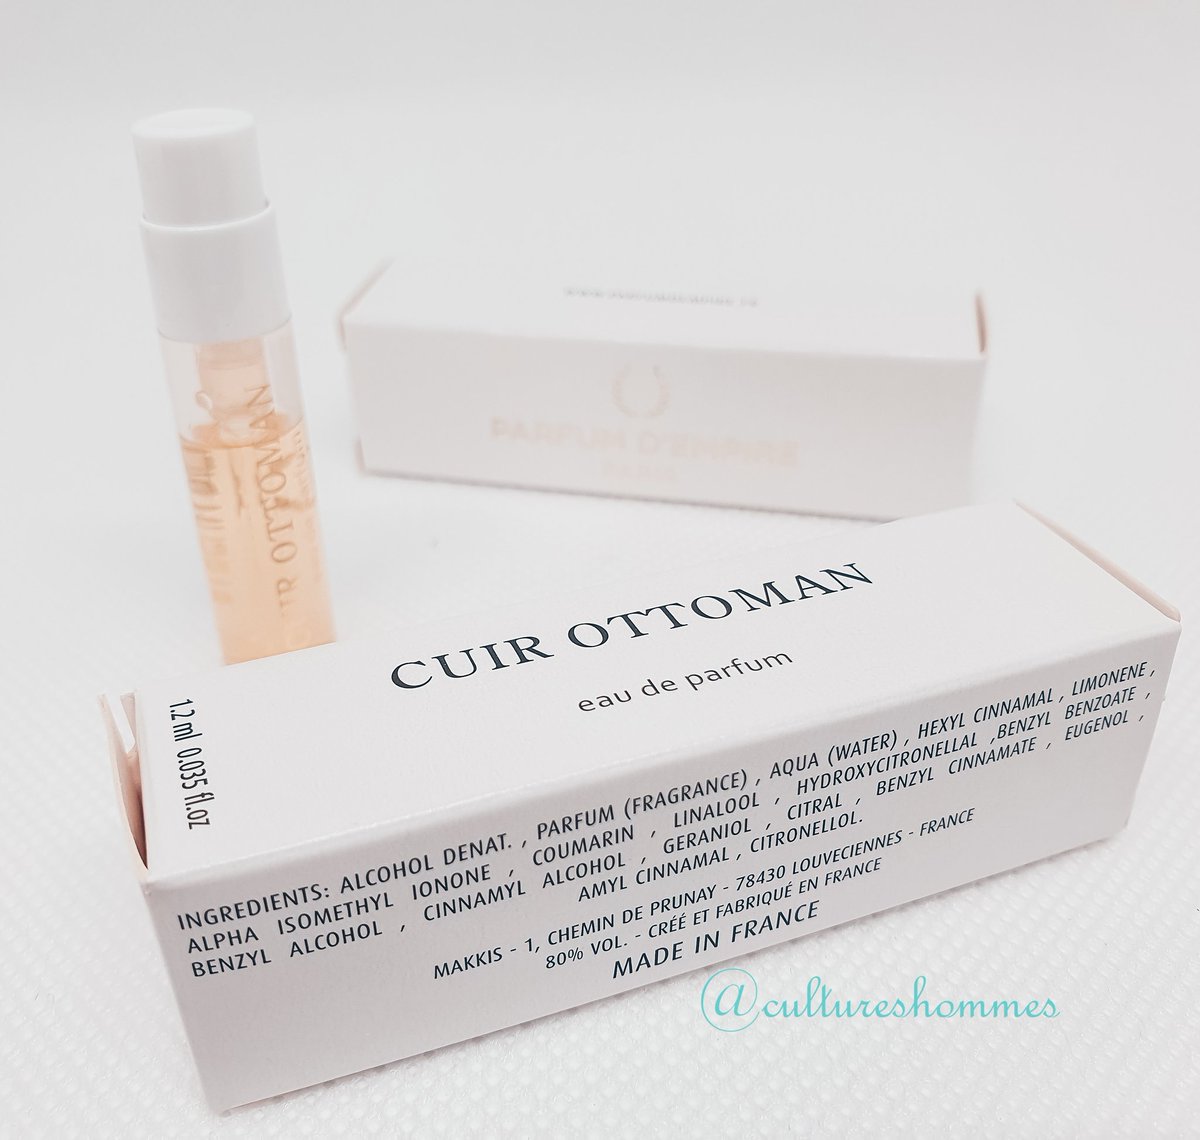 Scent of the day.
Cuir Ottoman @parfumdempire 
This morning, I am testing Cuir Ottoman.
A magnificient floral oriental launched in 2006.
#scentoftheday #scentblogger #ig_parfum #fraghead #profumo #lxs #parfüm #nichecommunity #nichefragrance #instaperfum
instagram.com/p/CFtmC9hBT96/…